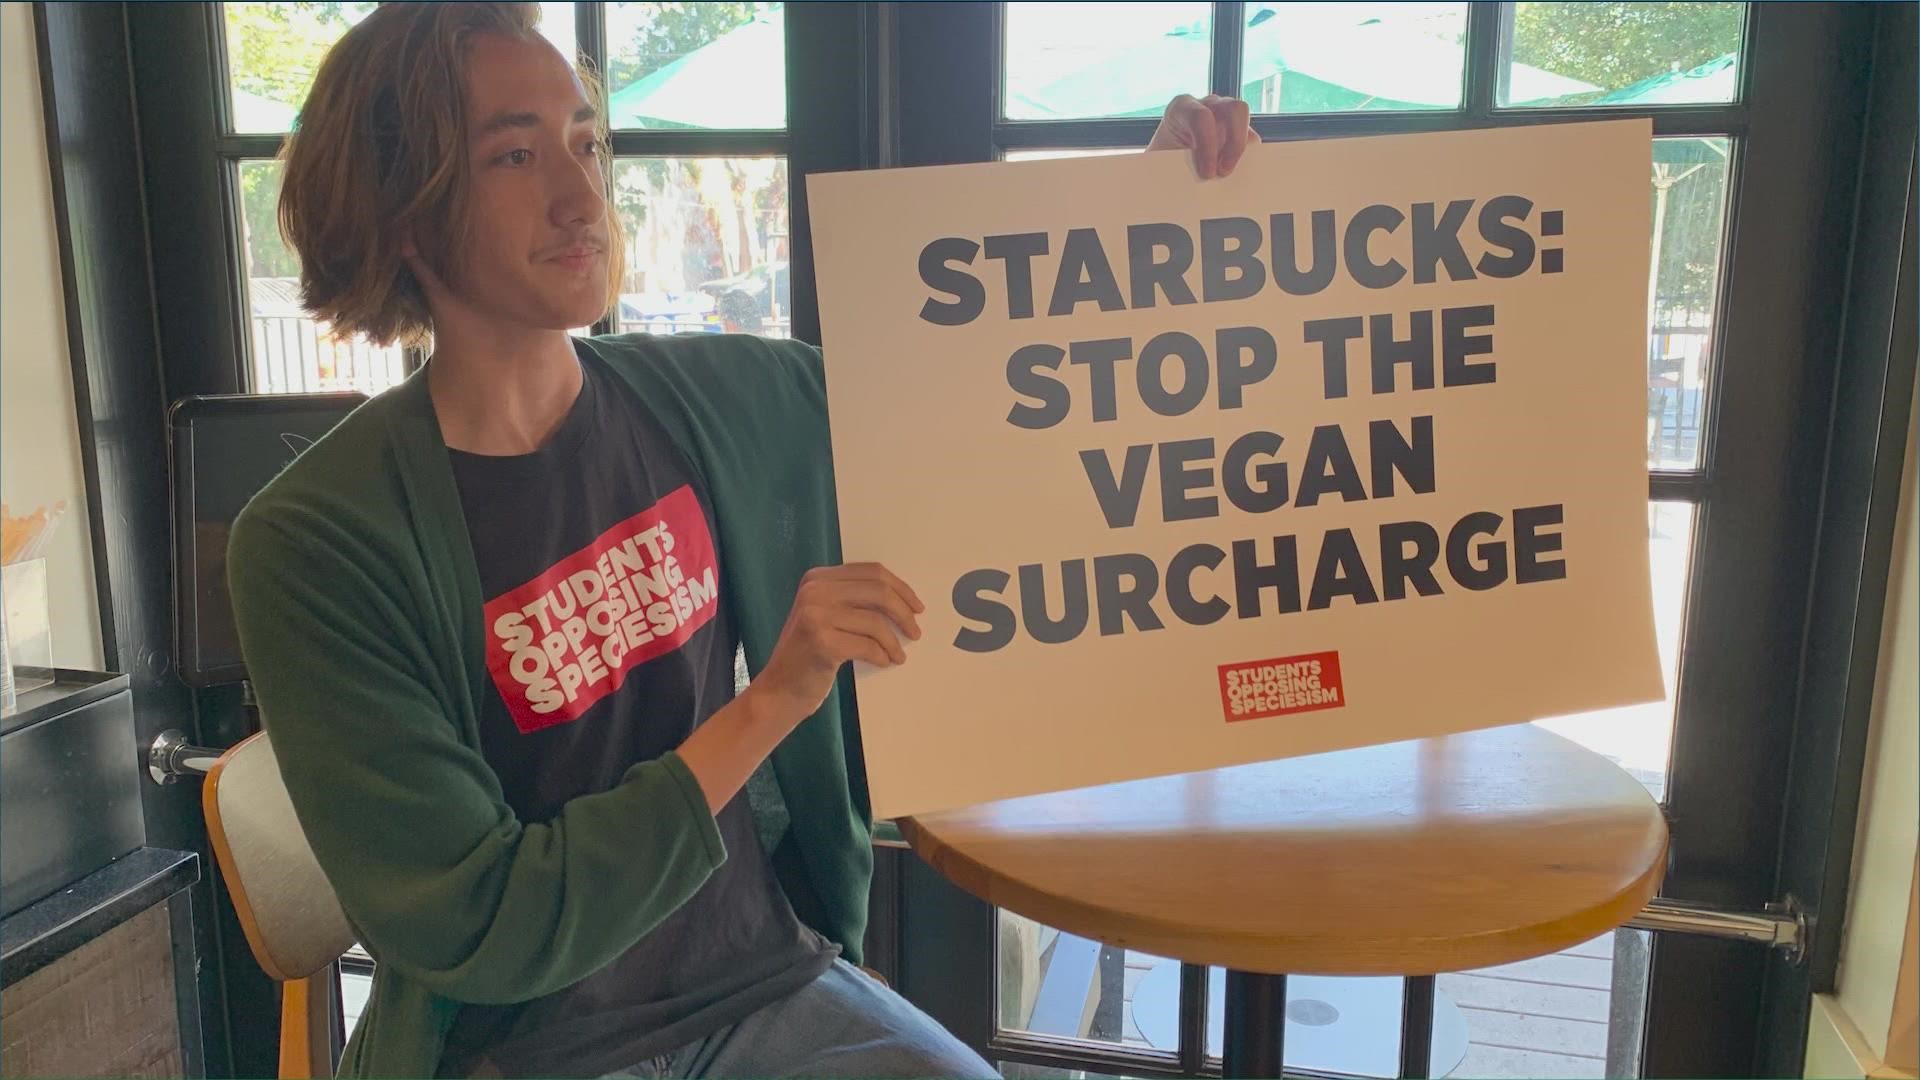 The group staged the sit-in at the Starbucks off West 24th Street near UT.